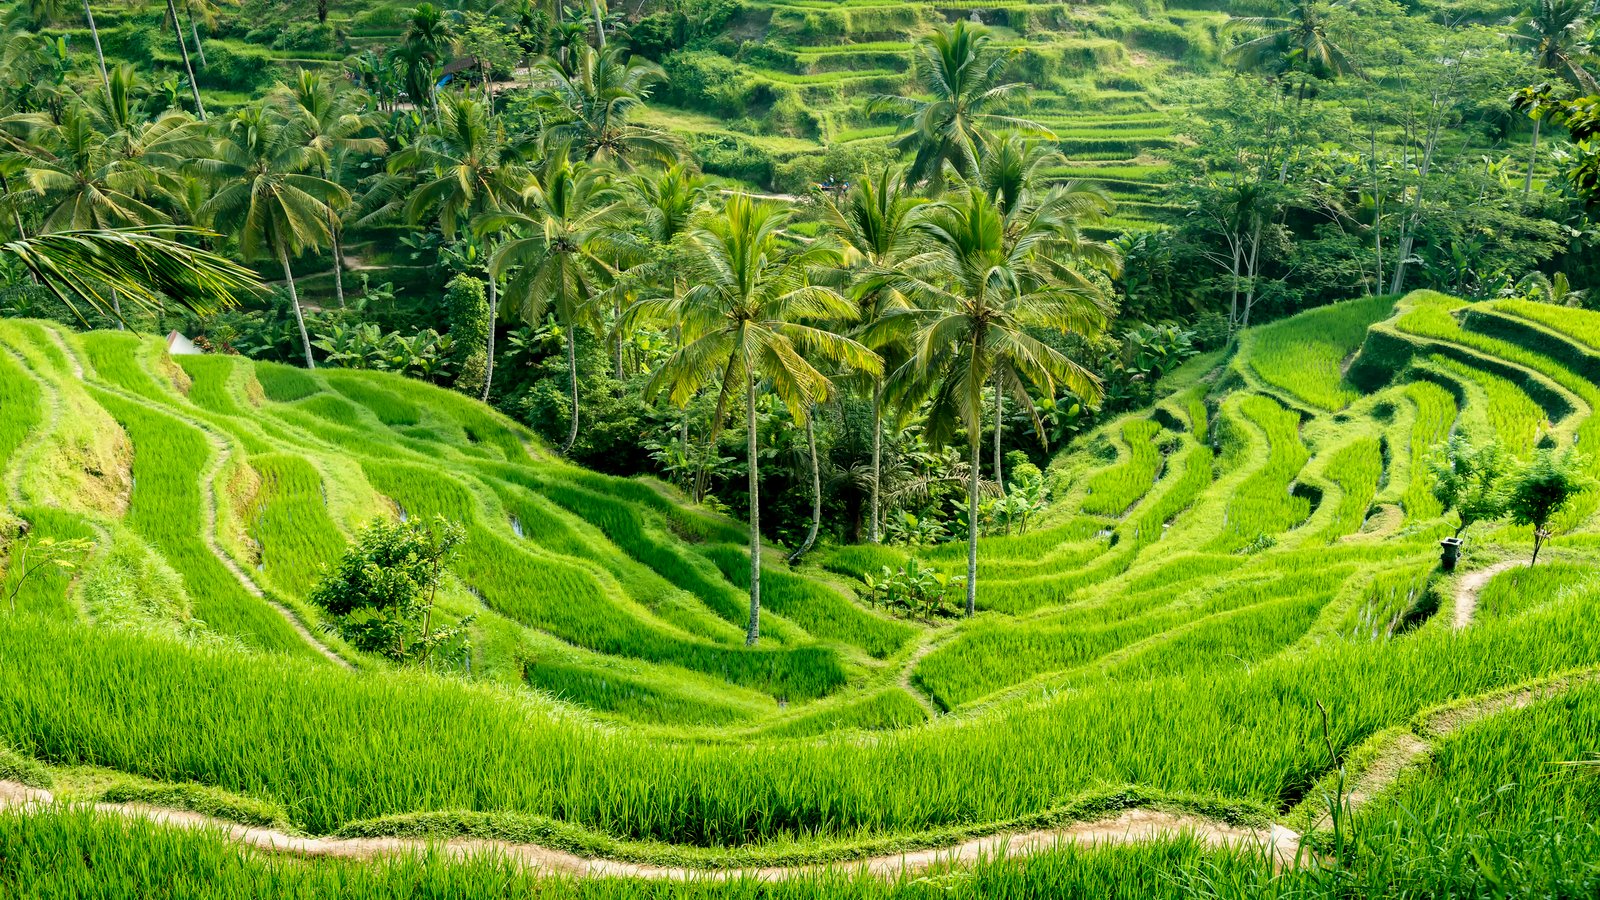 Famous attraction of Ubud - The Tegallalang Rice Terraces in Bali, Indonesia